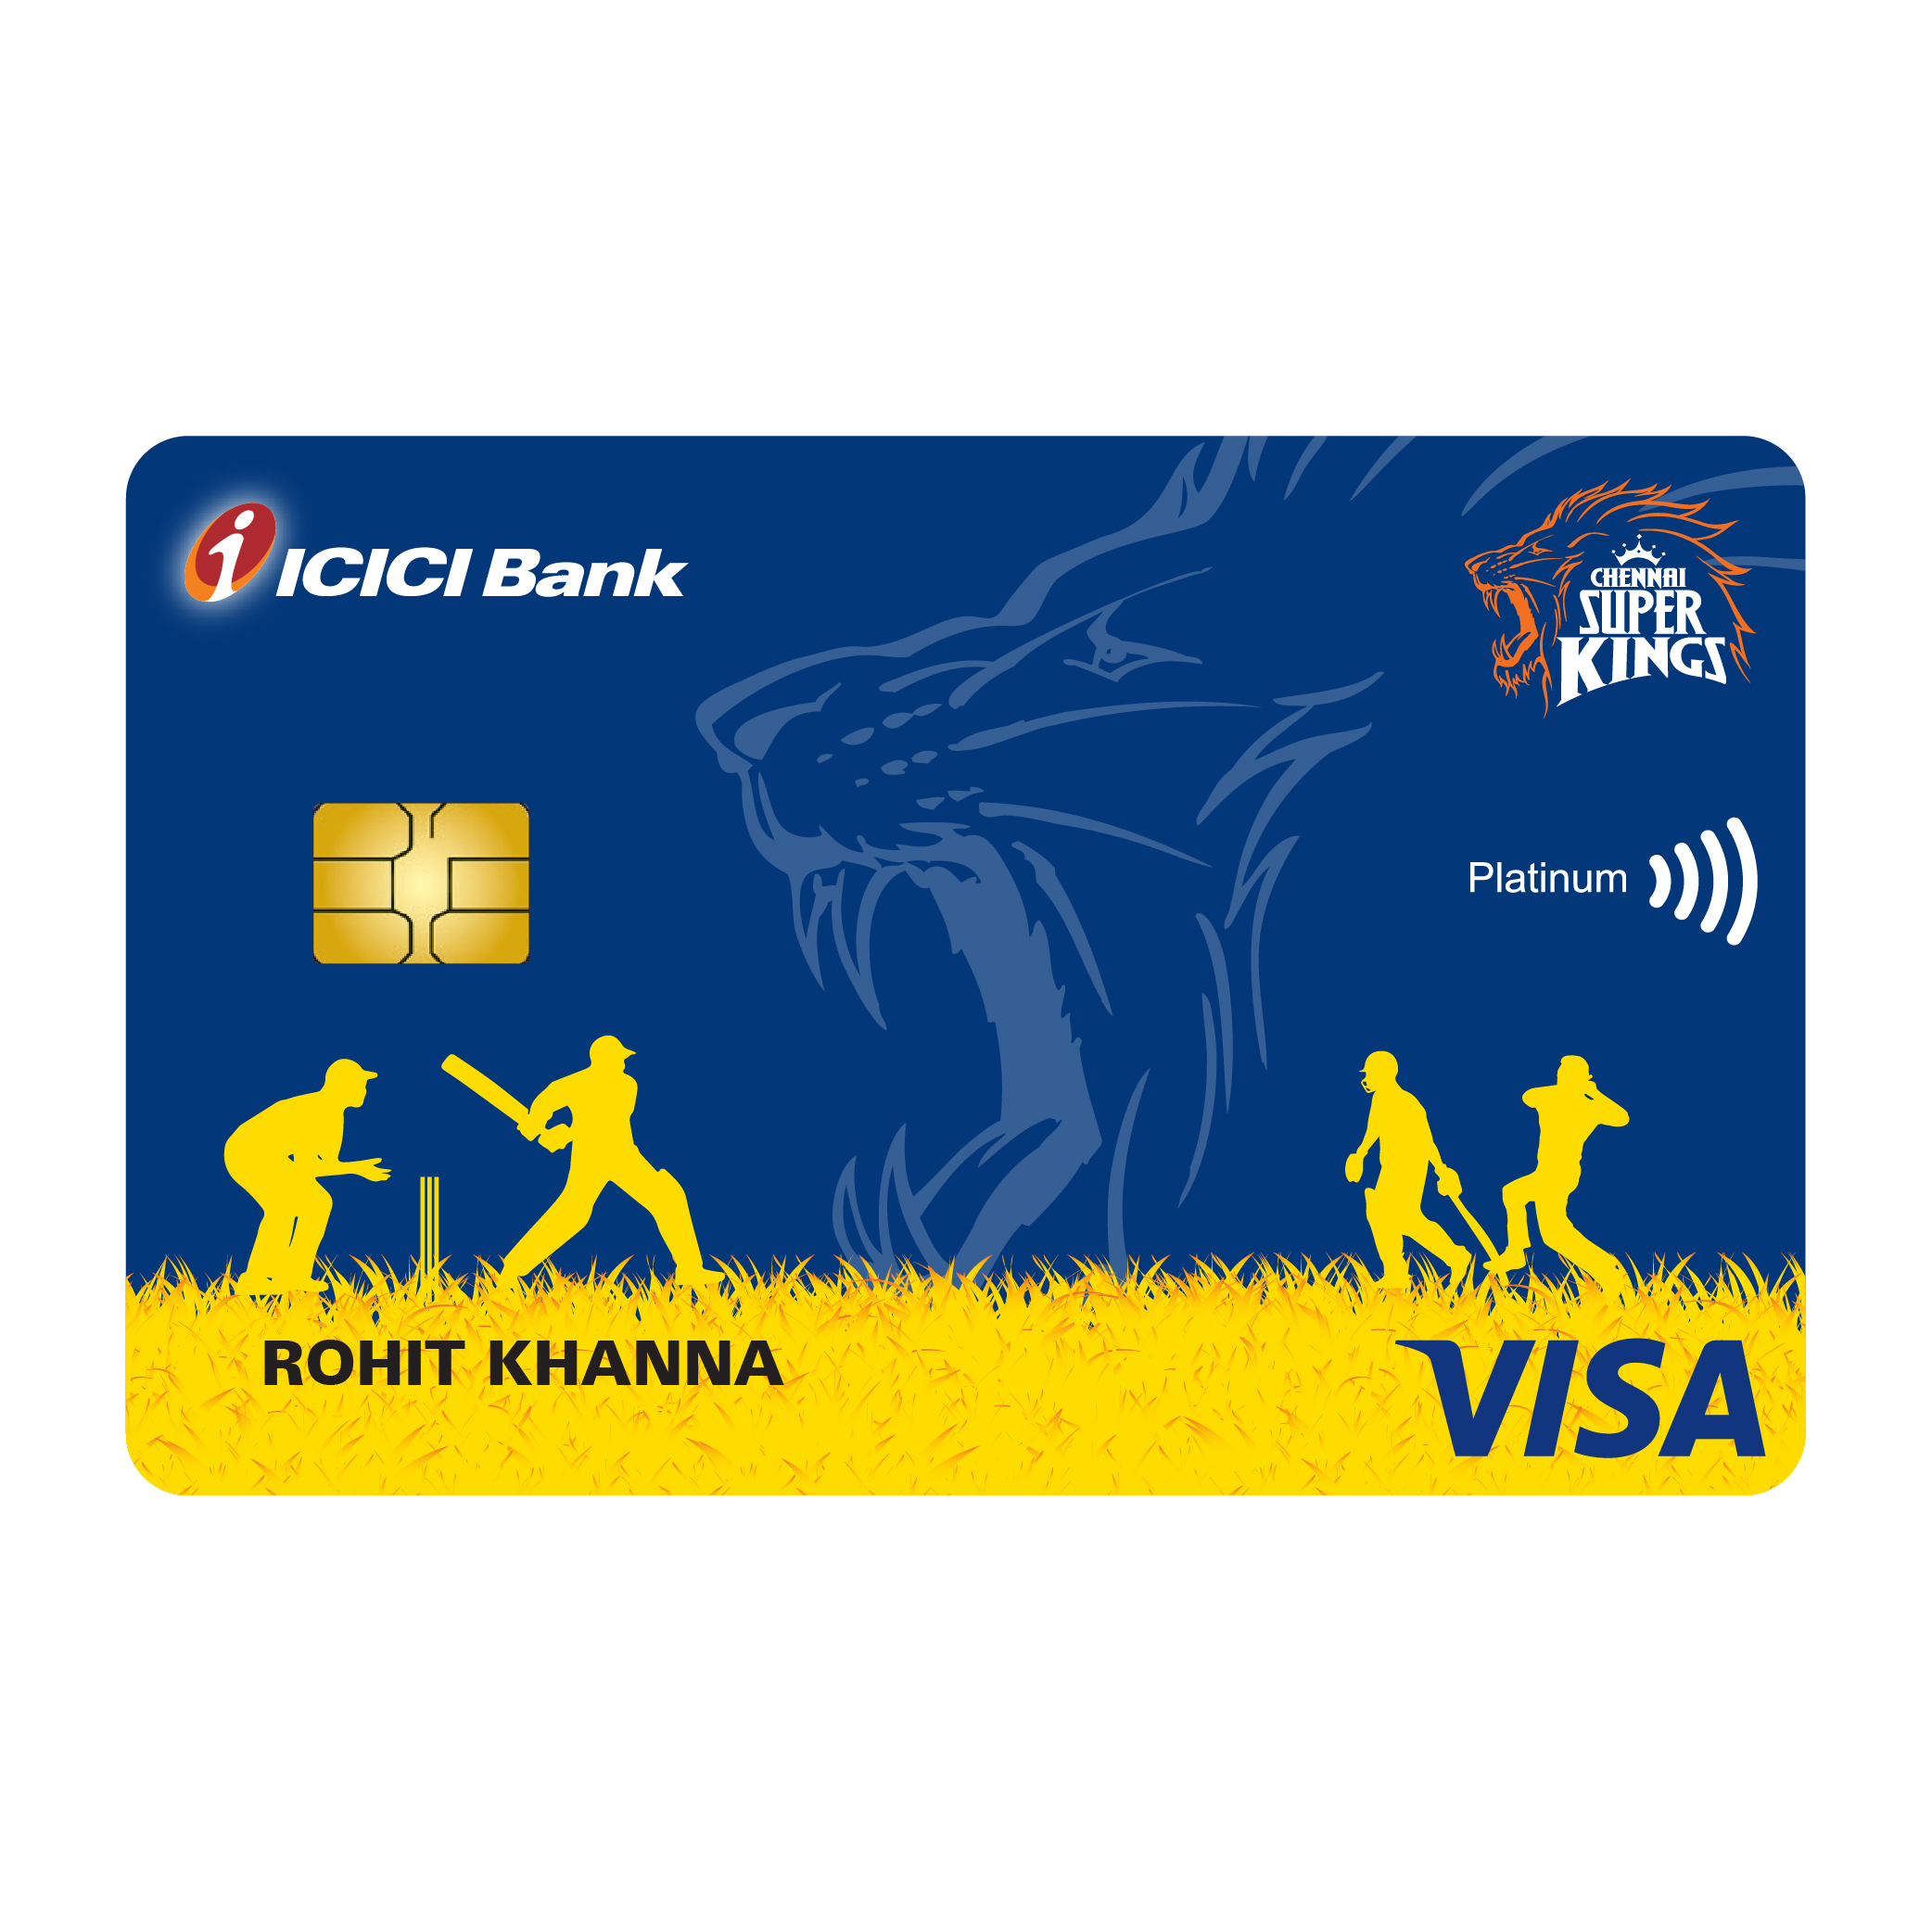 icici-bank-partners-with-chennai-super-kings